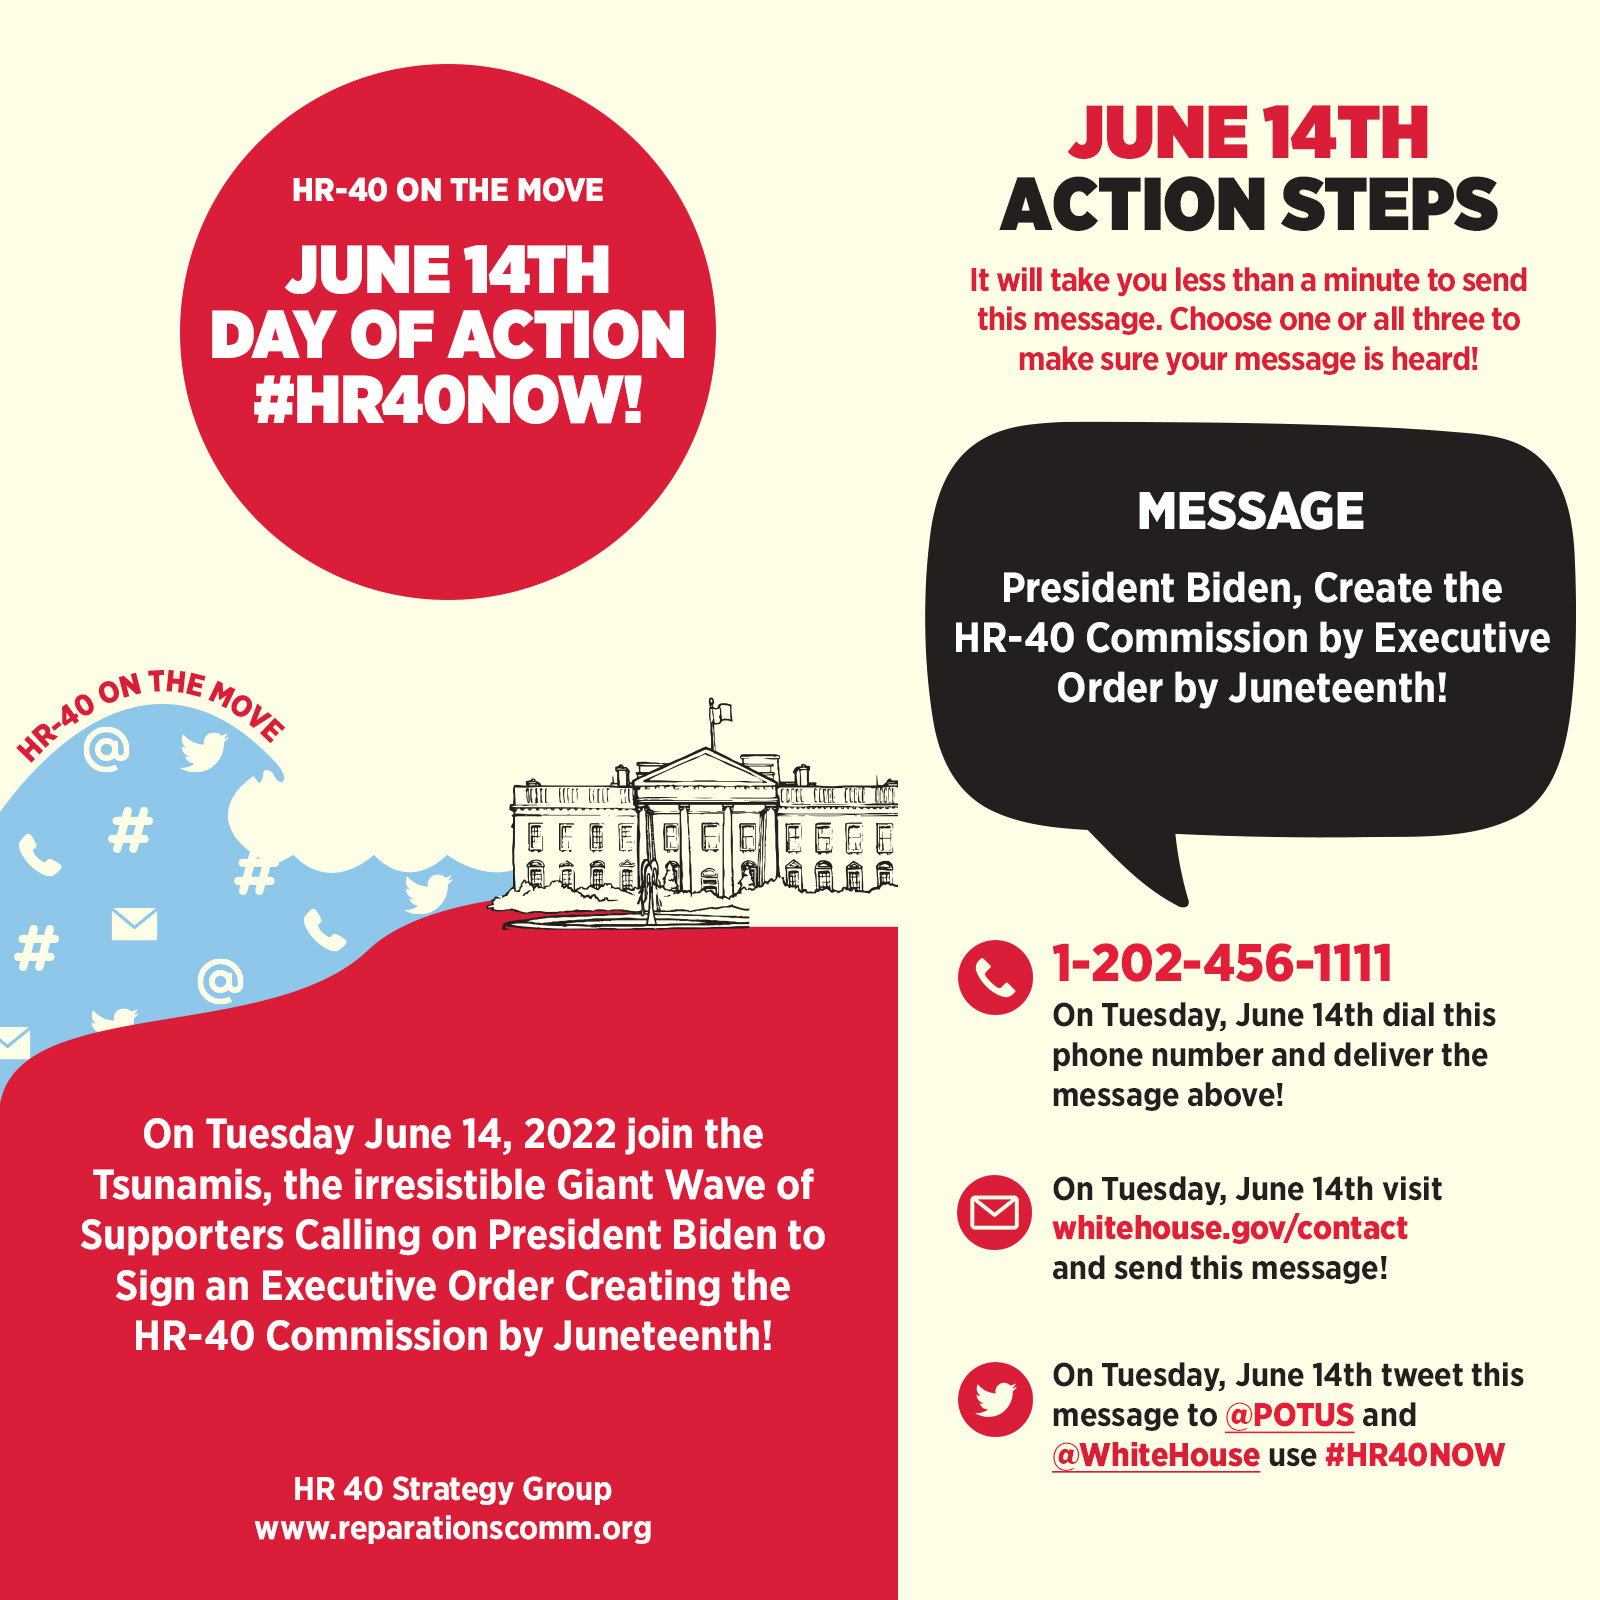 On Tuesday June 14, 2022 join the Tsunamis, the irresistible Giant Wave of Supporters Calling on President Biden to Sign an Executive Order Creating the HR-40 Commission by Executive Order by Juneteenth!